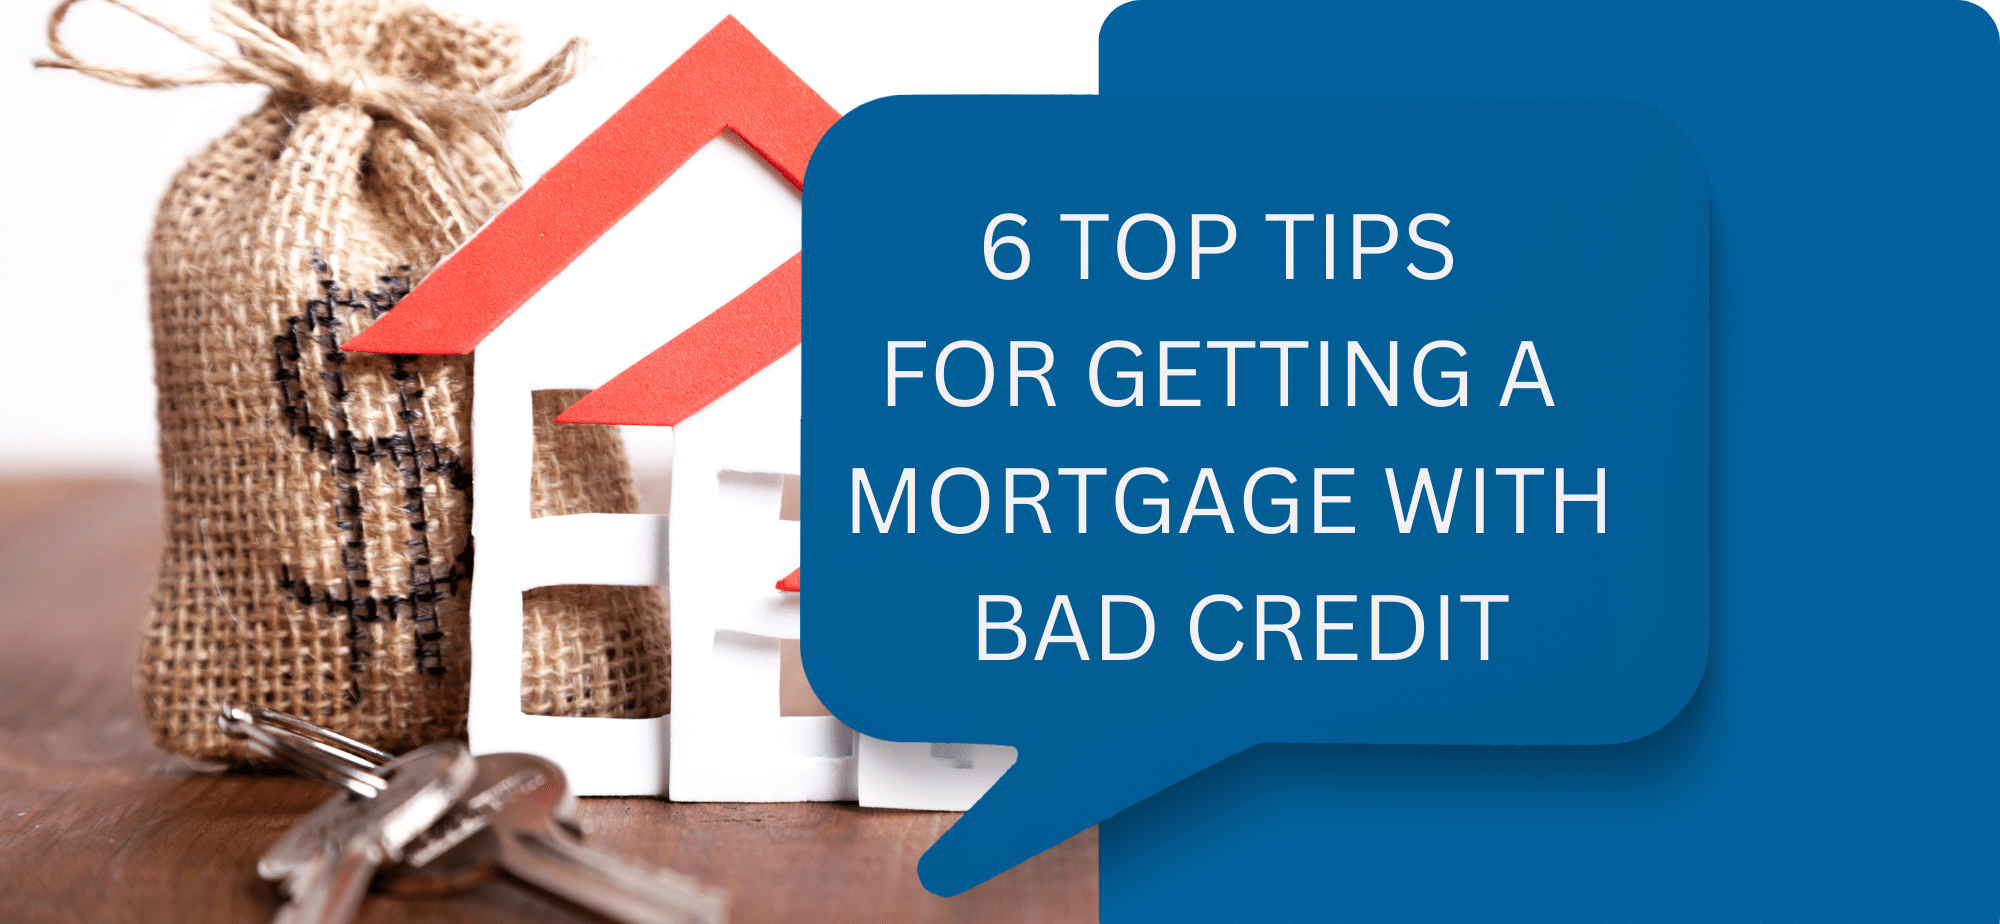 6 Top tips for getting a mortgage with bad credit